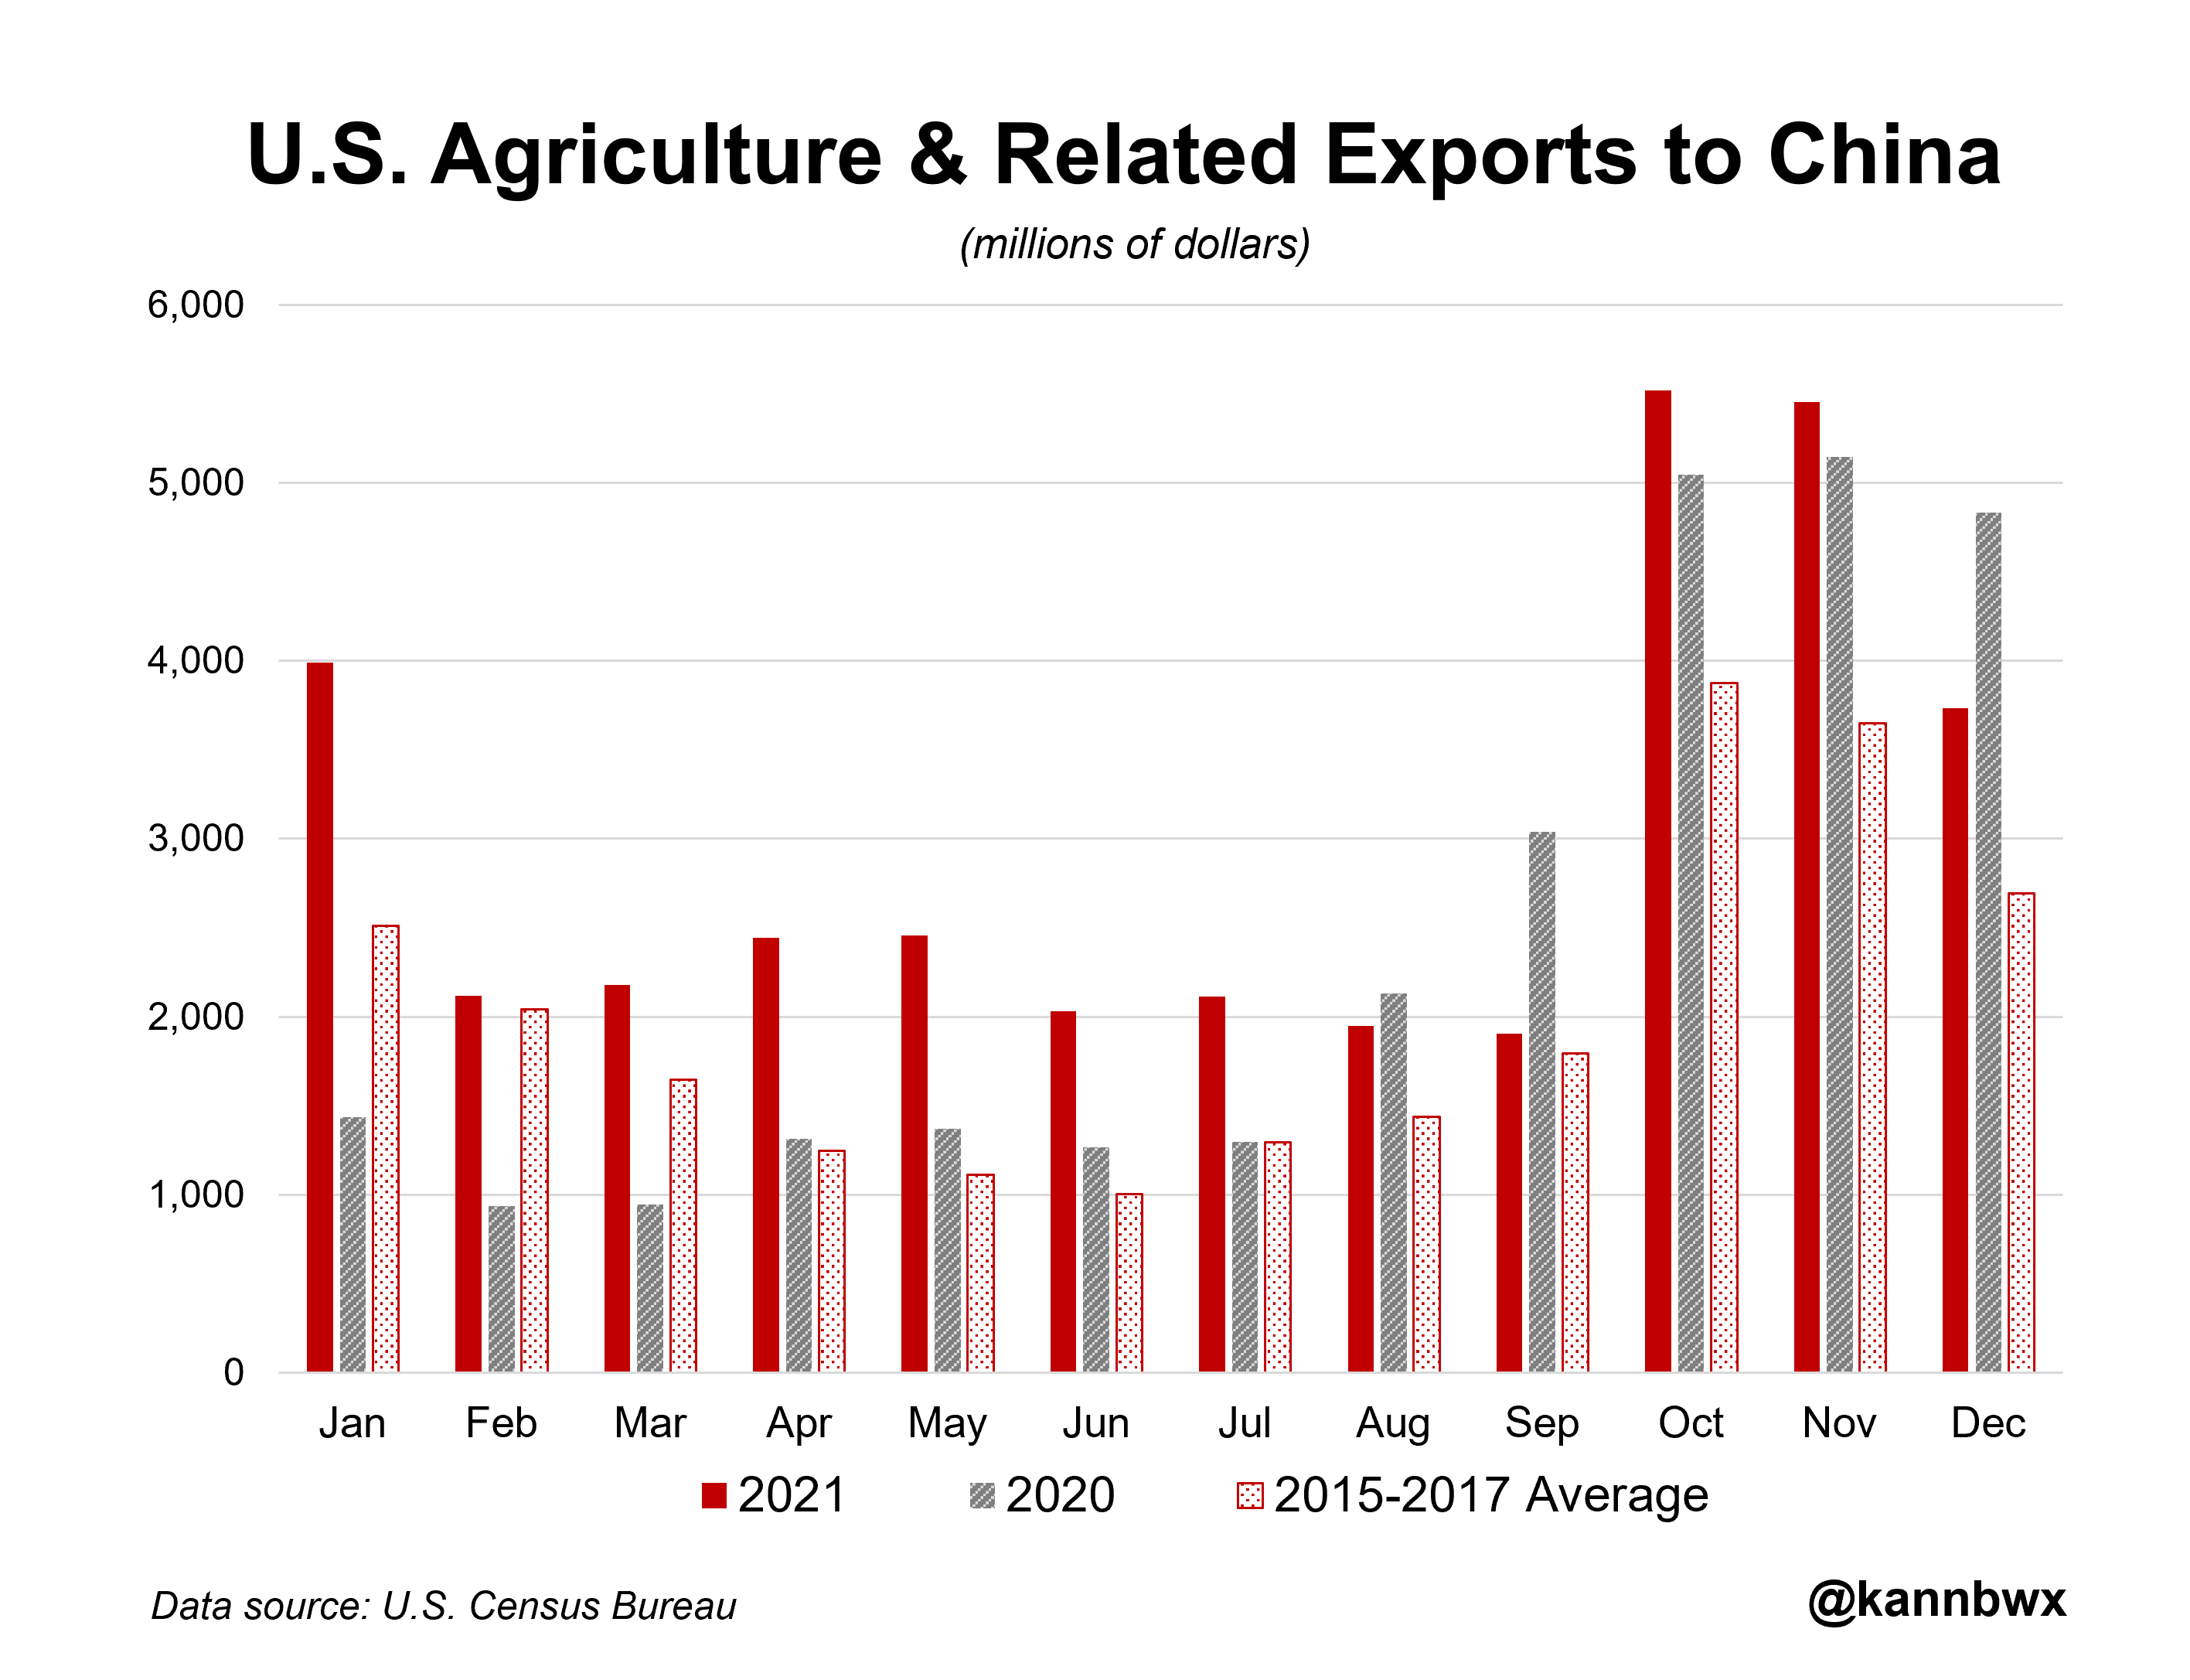 U.S. agriculture and related product exports to China